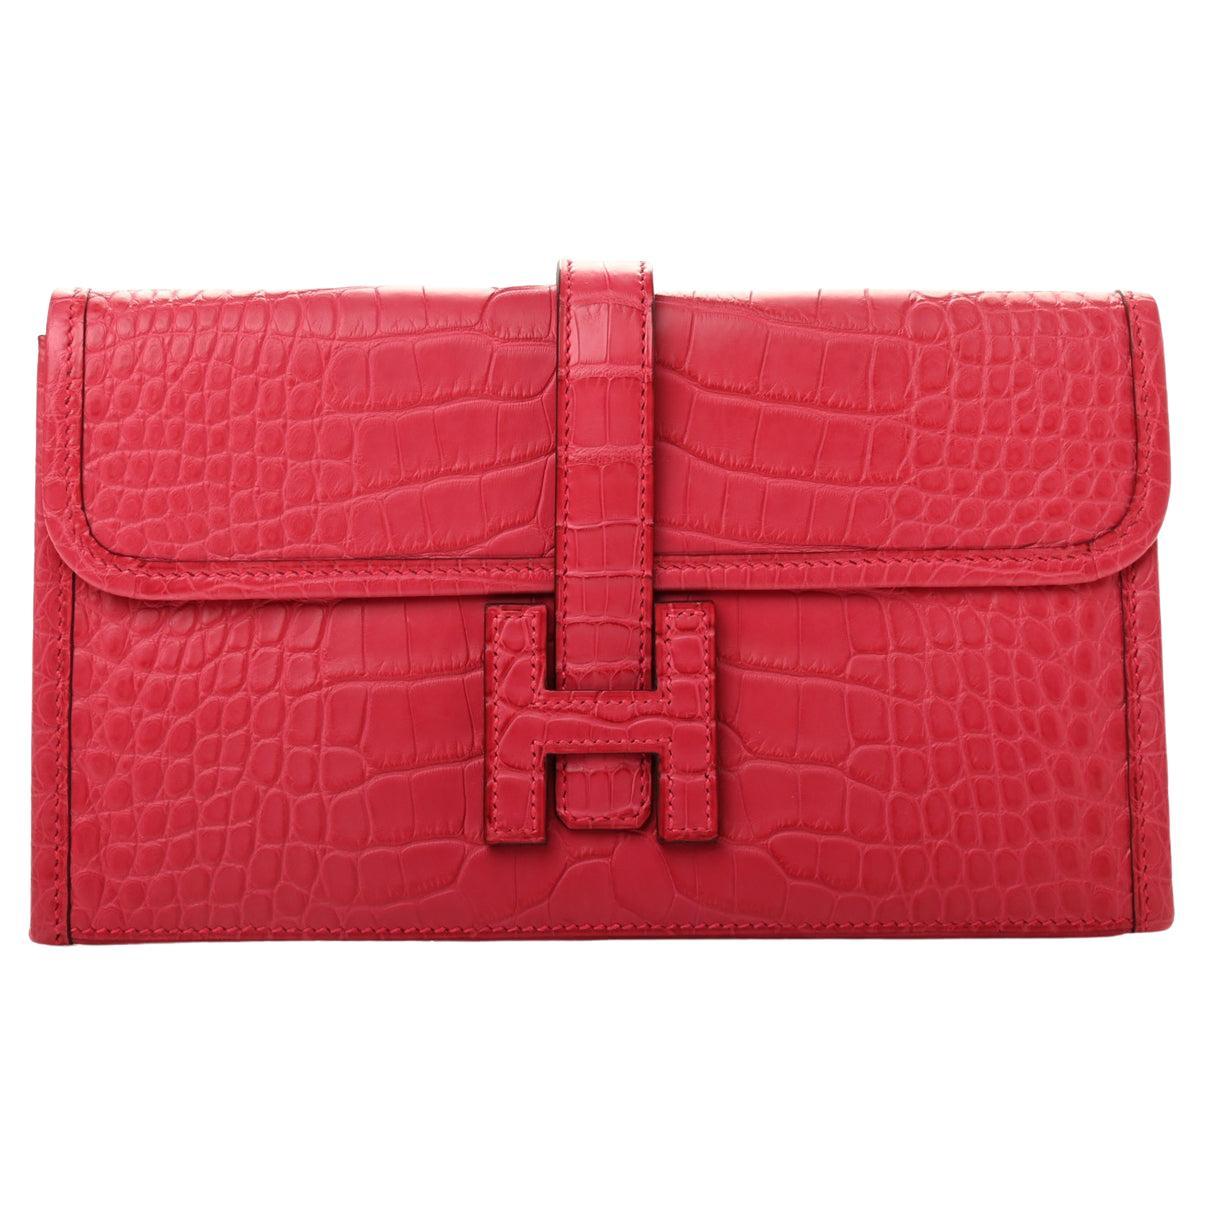 HERMES NEW Pink Red Framboise Matte Alligator Exotic Leather Jige Duo Clutch Bag